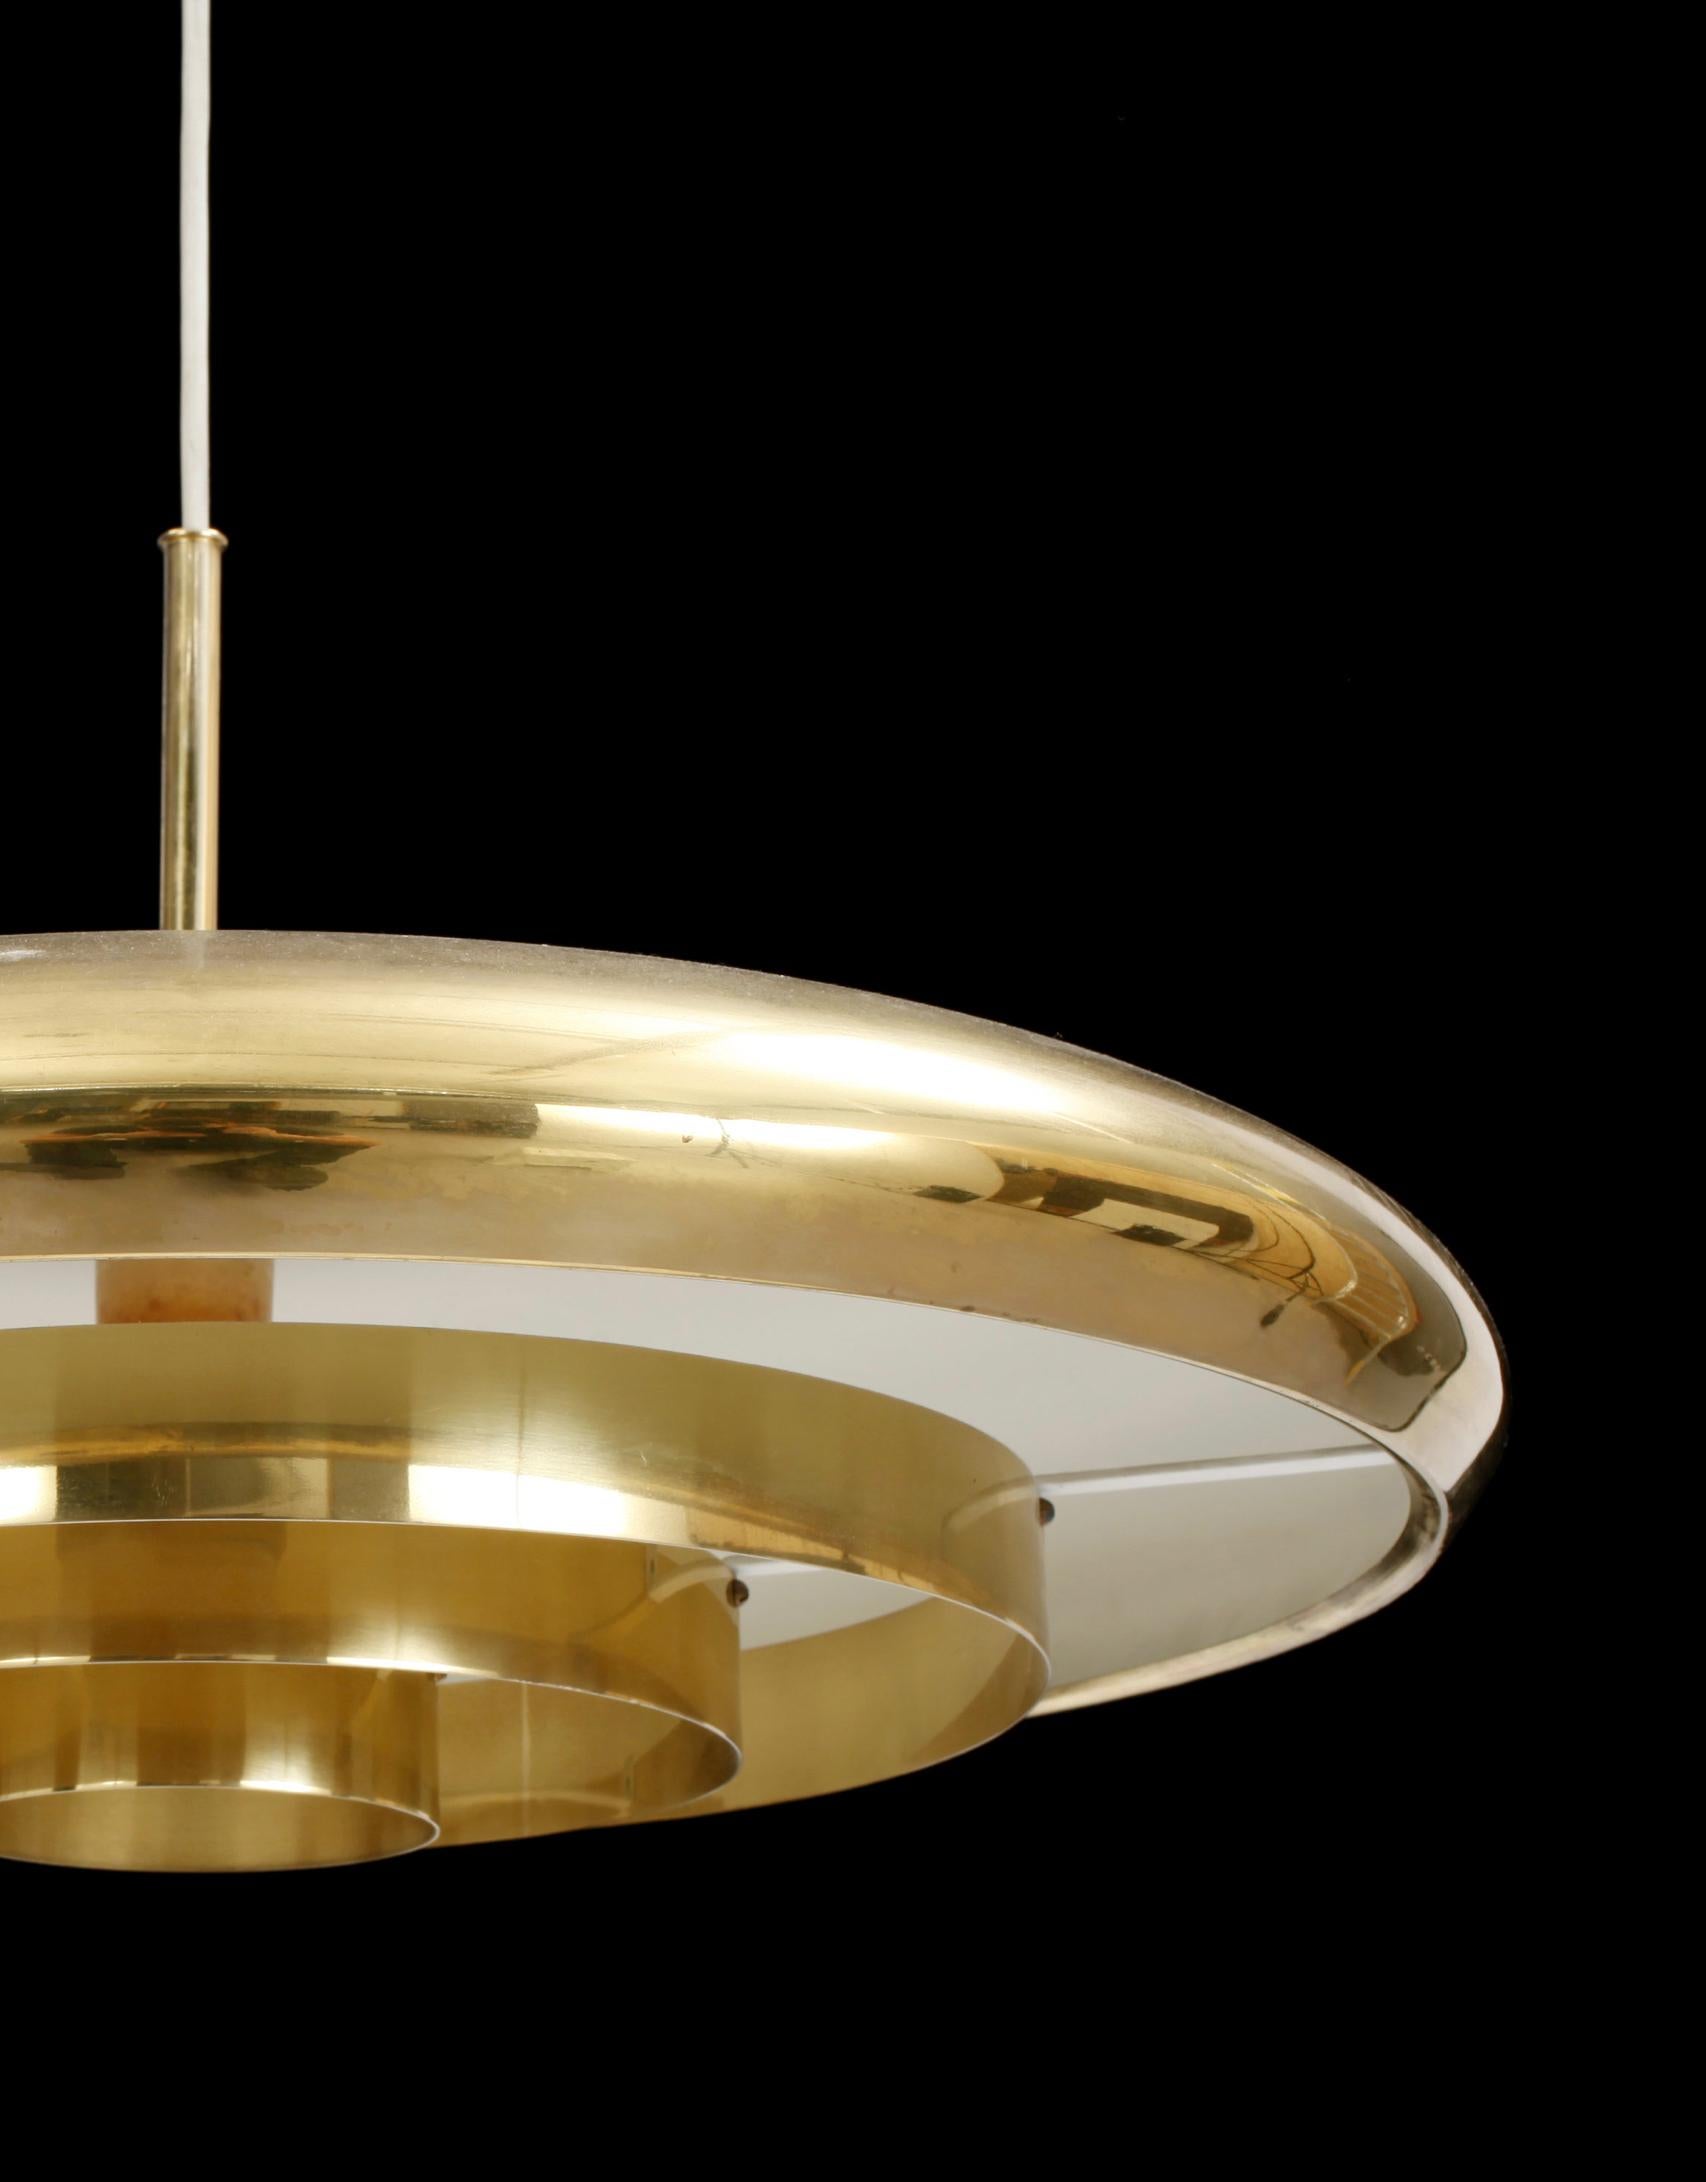 A large brass pendant light by Bergboms of Sweden, around 1960. A rare piece, well made, and a nice example of Scandinavian modern design. 
The piece is in vintage condition with some wear in line with age, mainly to the lacquer of the upper shade